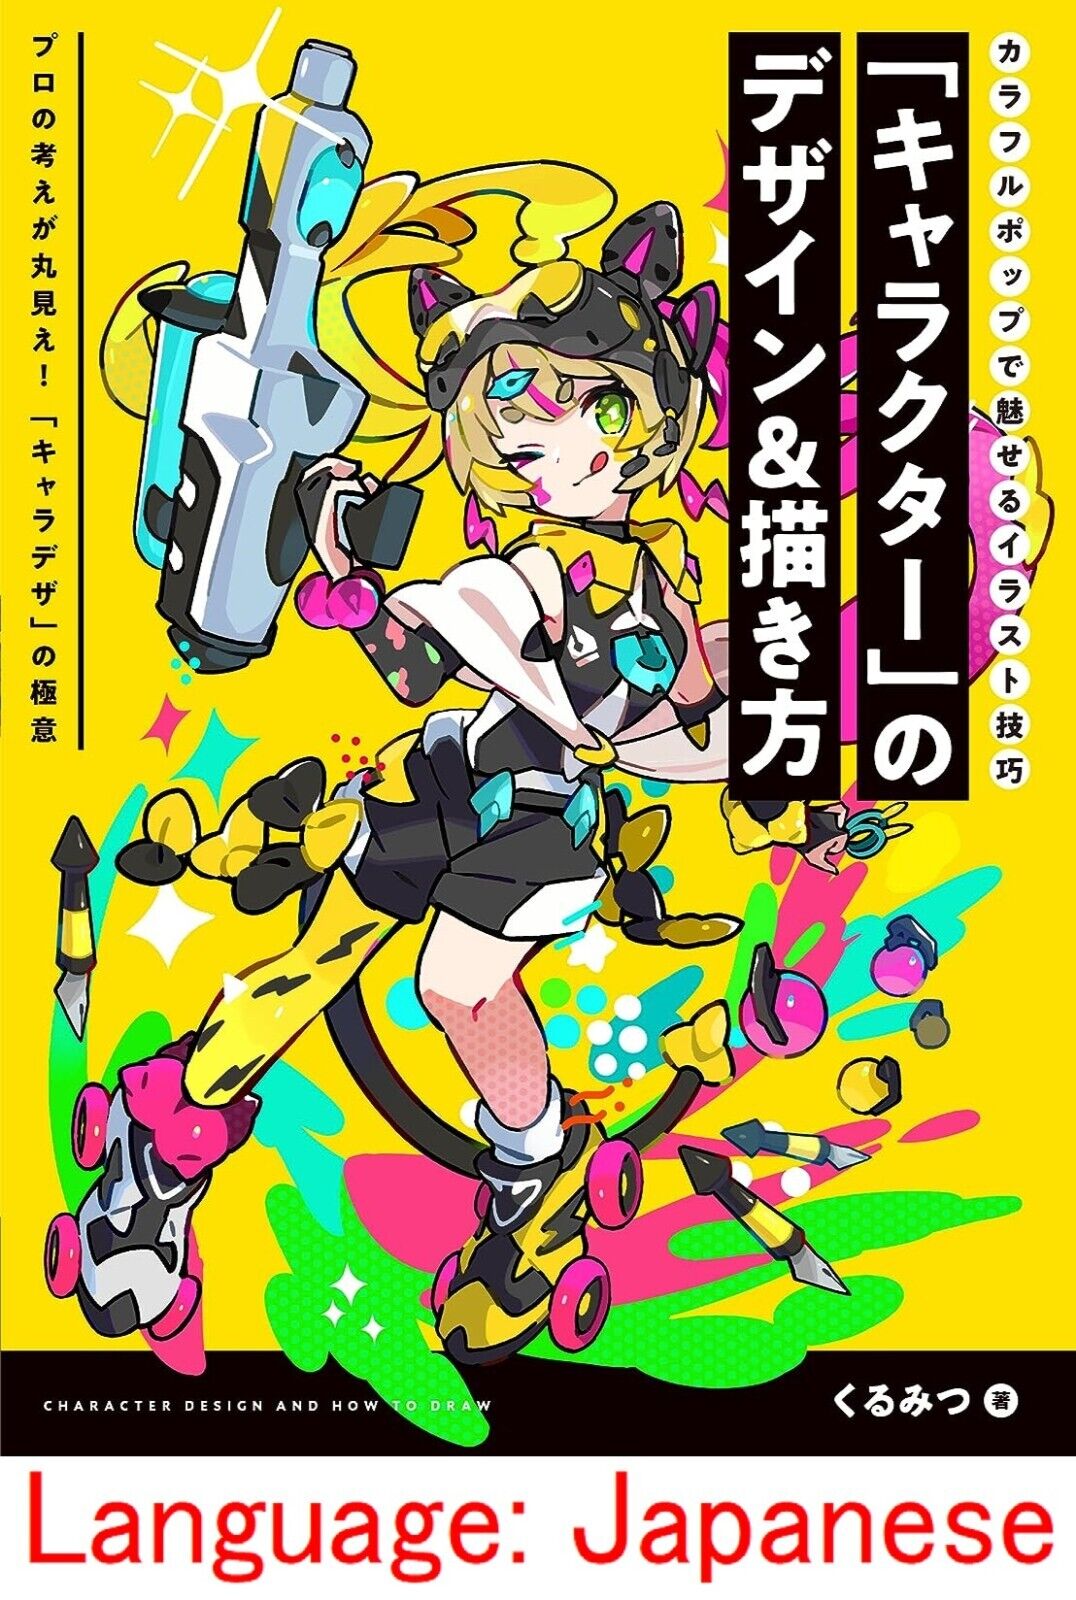 How to Draw Colorful Pop Character Design Illustration Techniques Japanese Comic